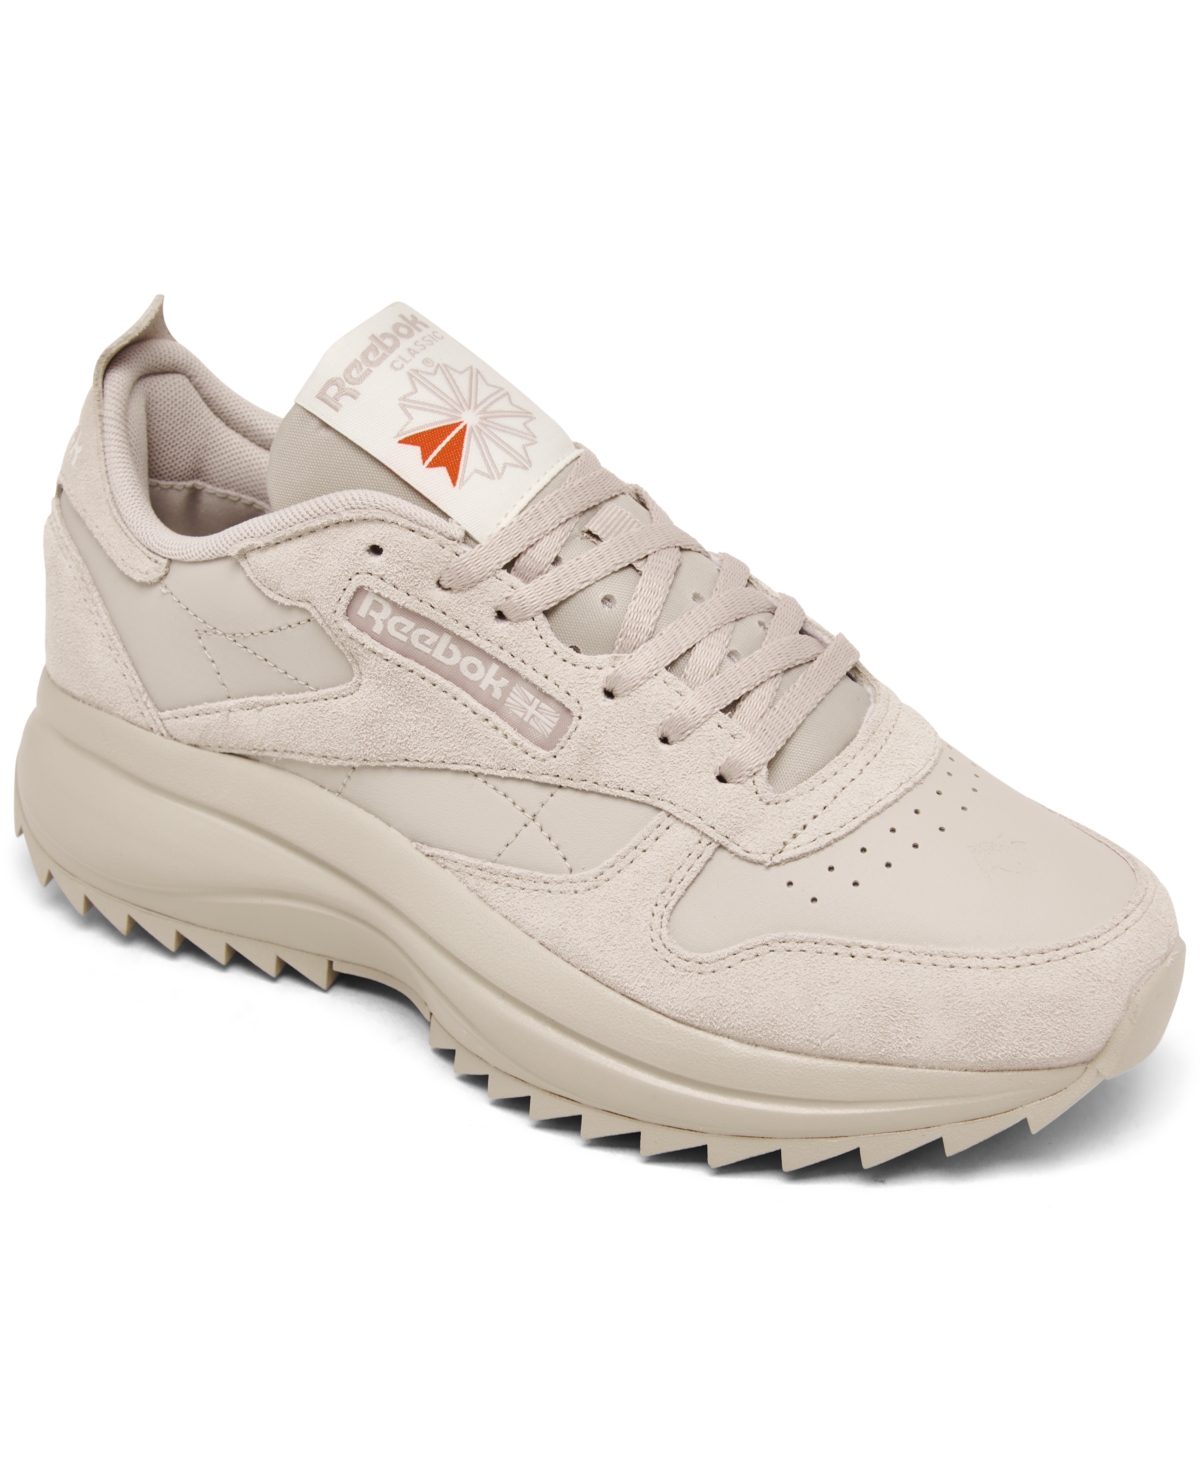 Women's Classic Leather Sp Casual Sneakers from Finish Line - Moonstone/moonstone